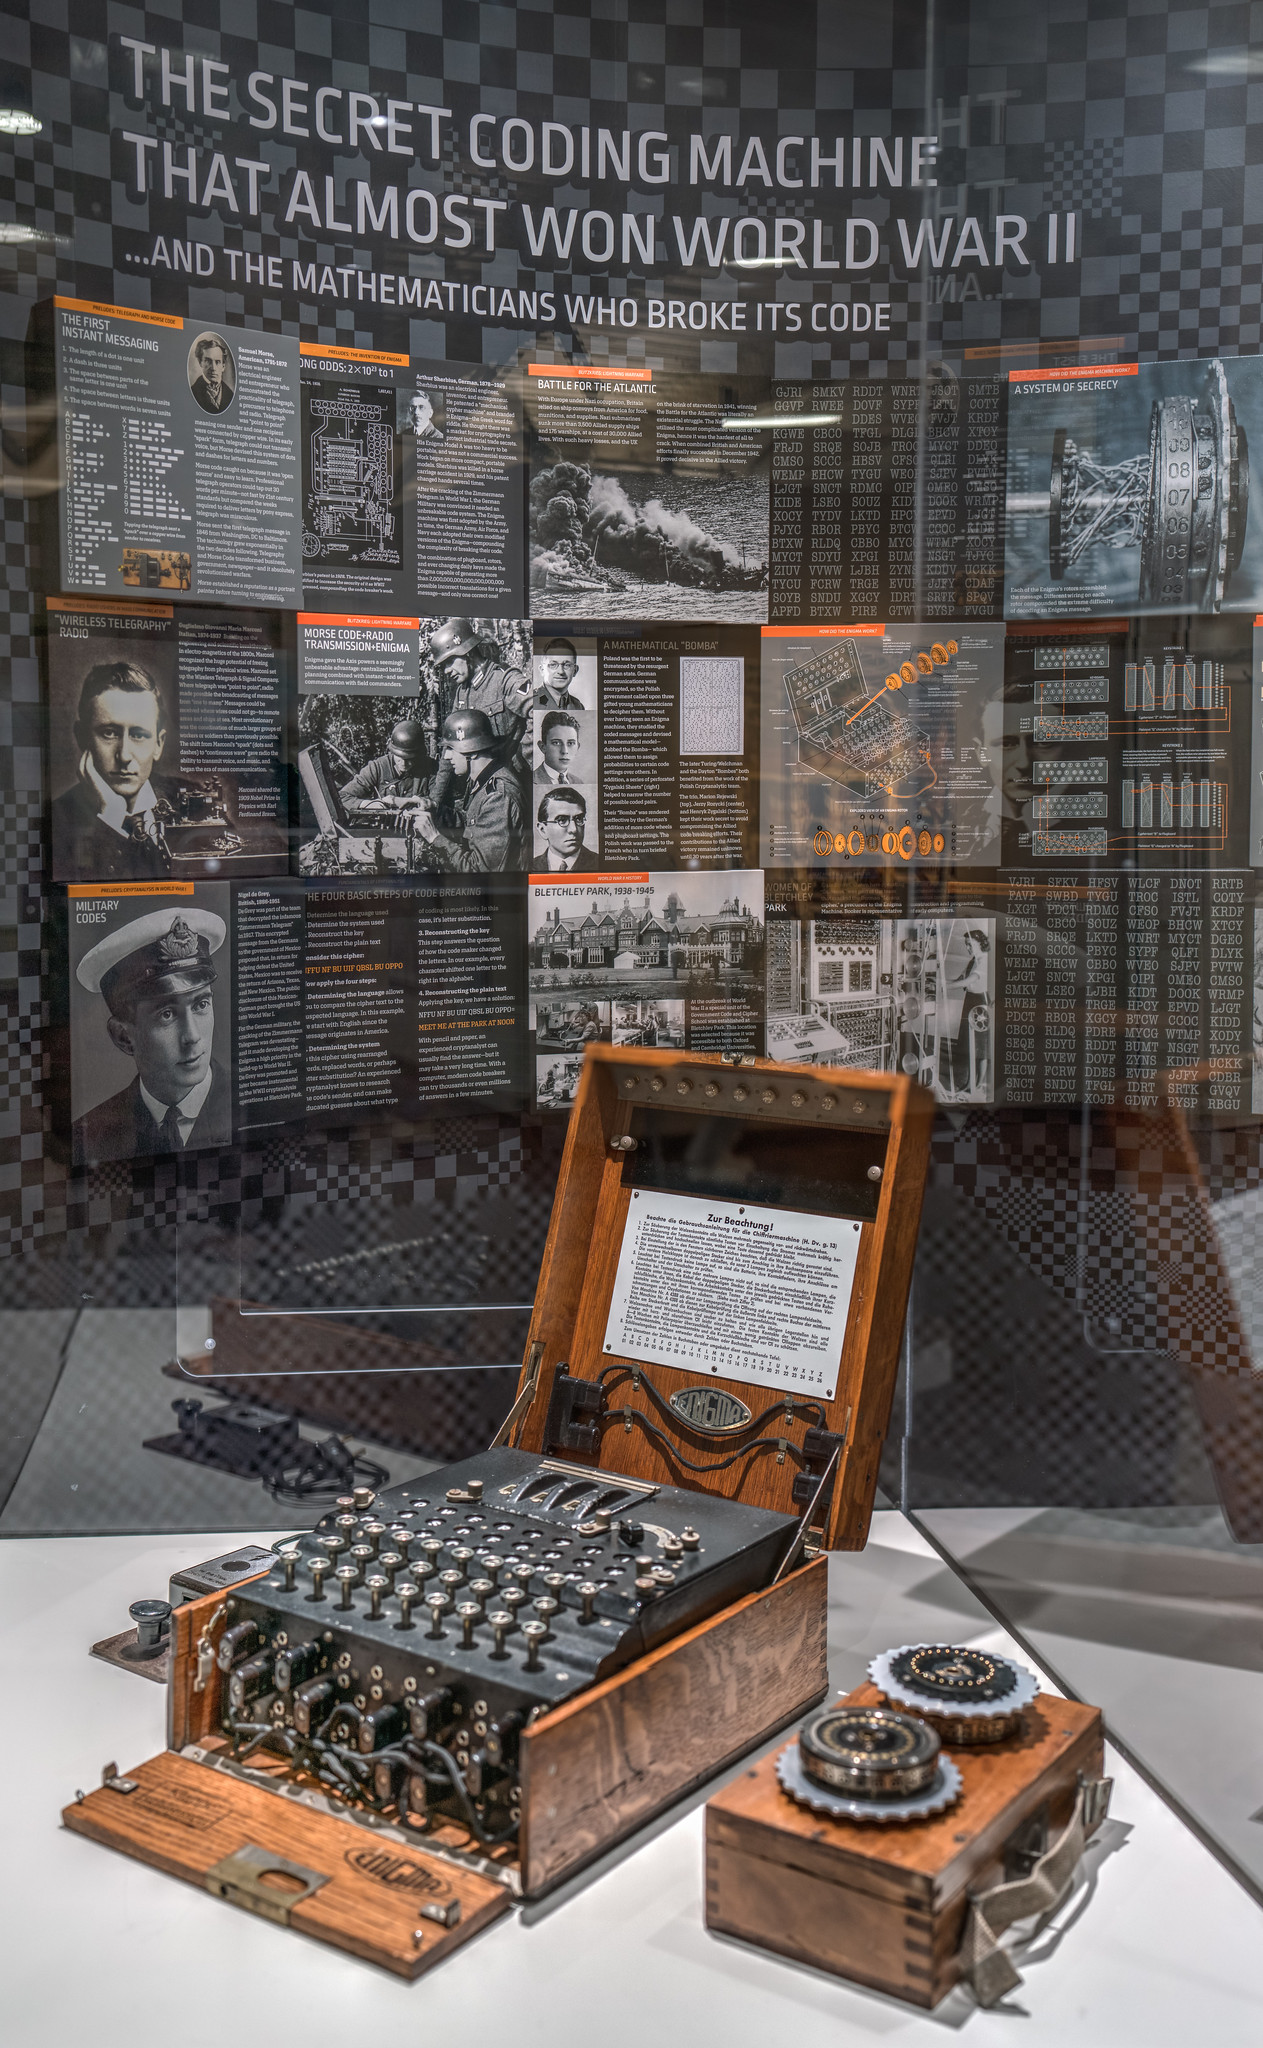 Enigma machine goes on display at The Alan Turing Institute